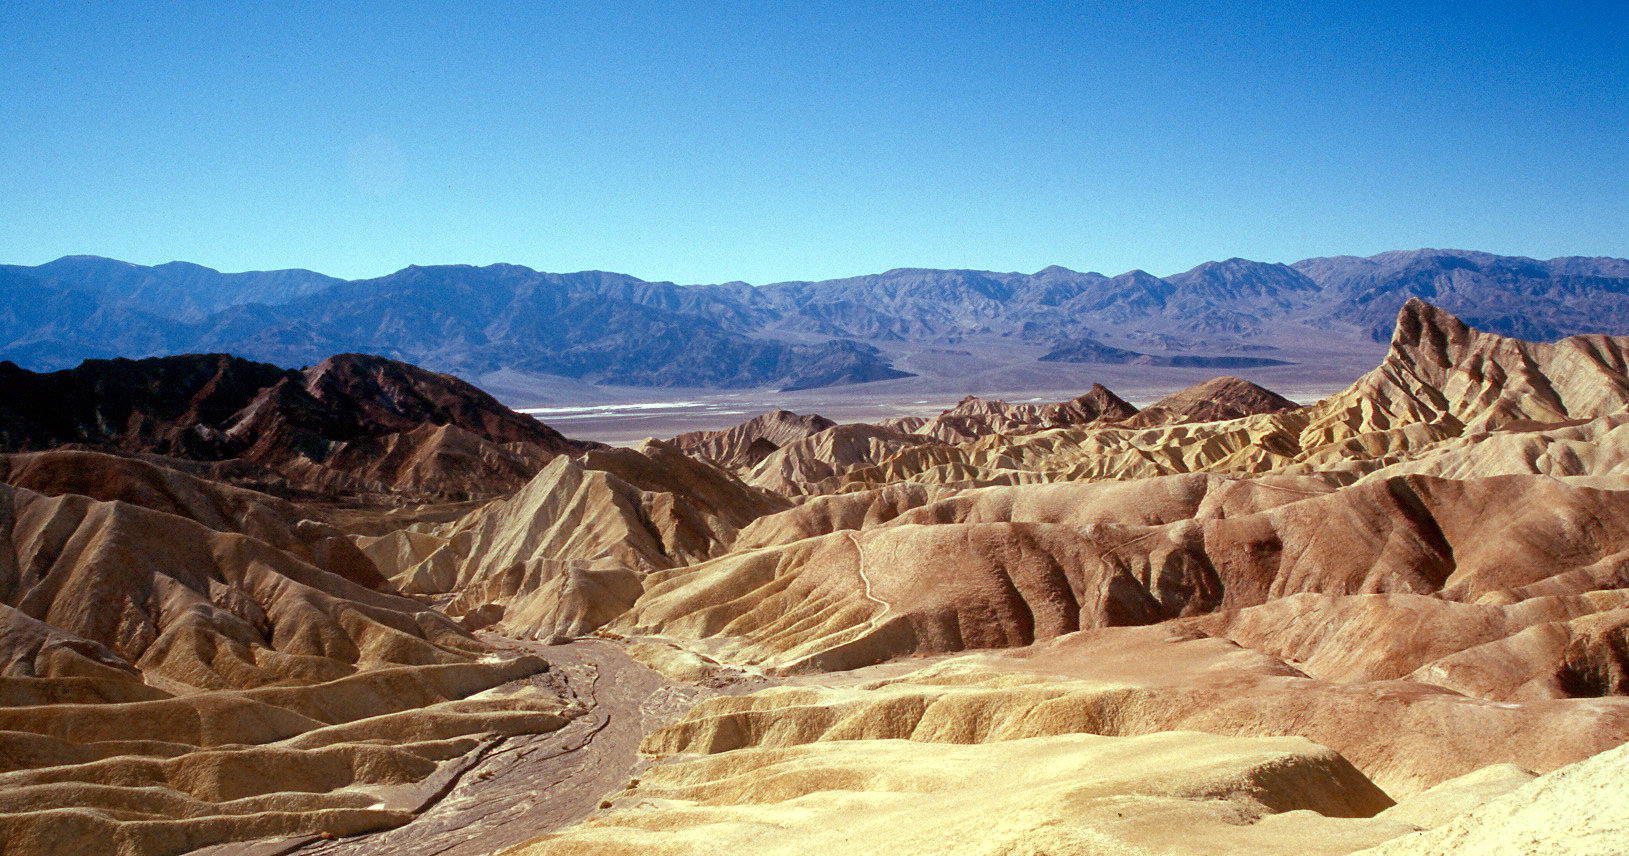 The hottest ground temperature ever recorded was 94C in Death Valley, USA